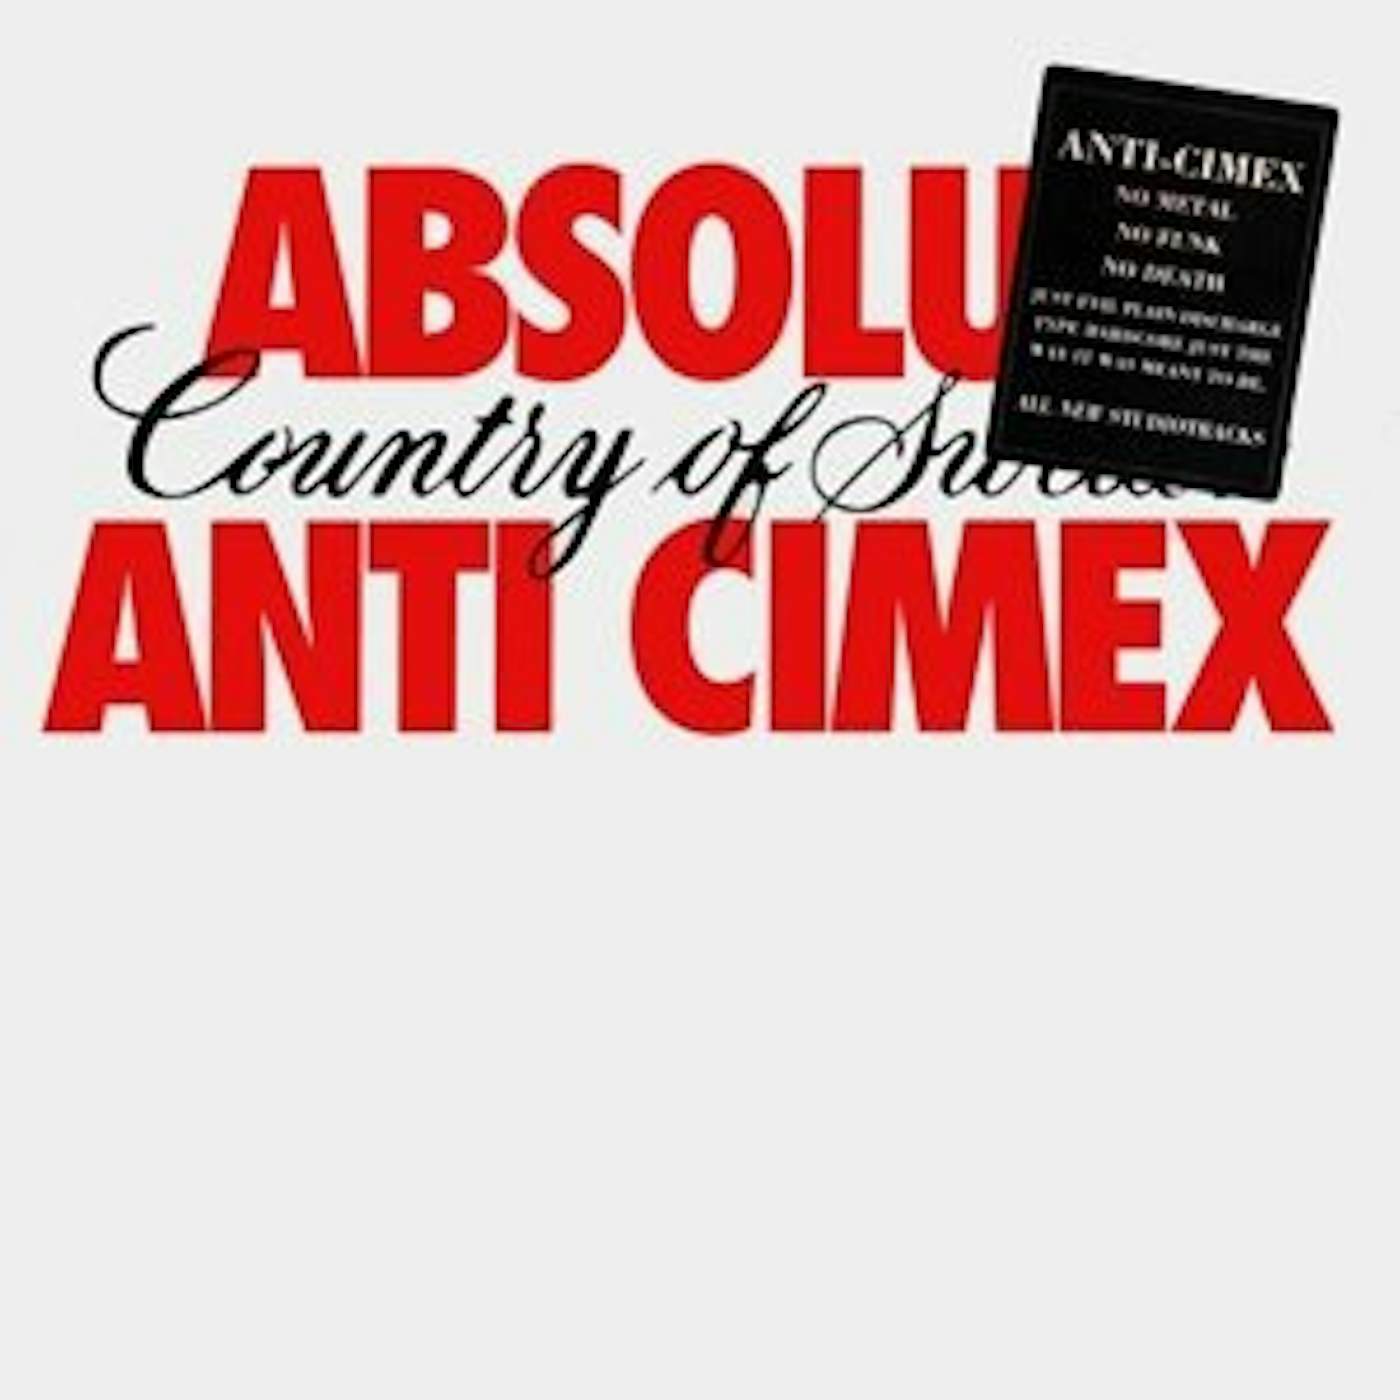 Anti Cimex ABSOLUT COUNTRY OF SWE Vinyl Record